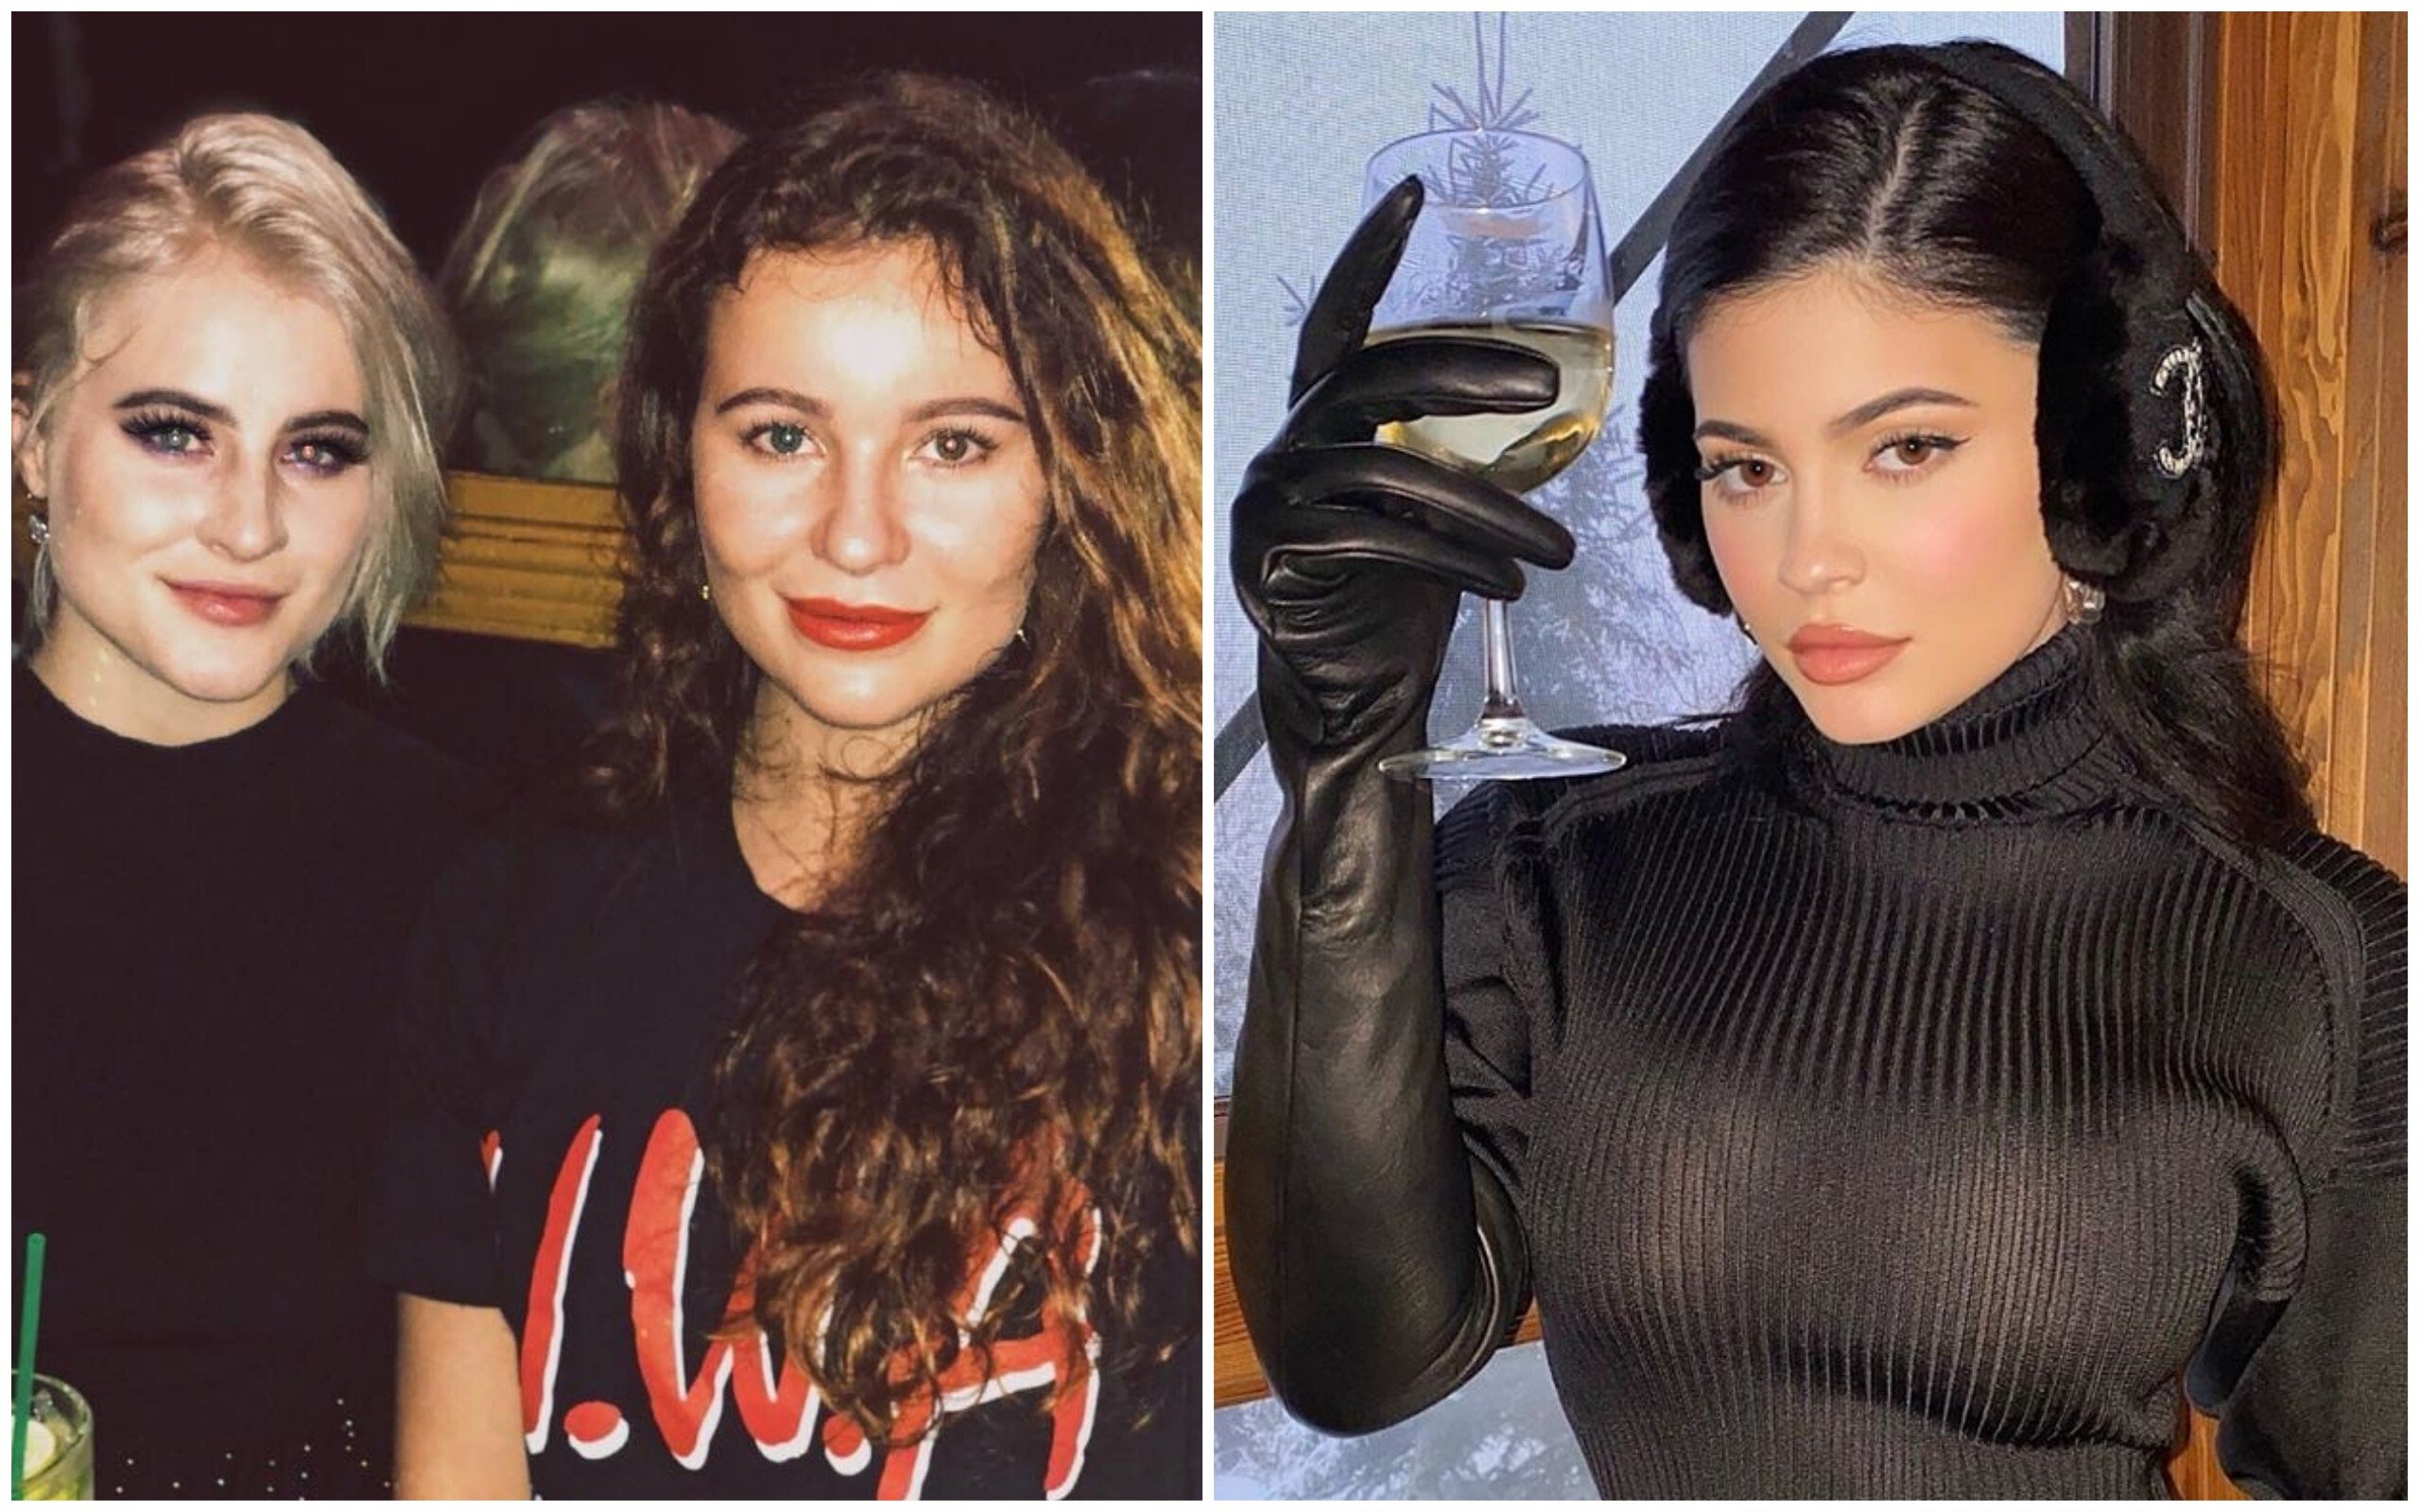 Sisters Katharina and Alexandra Andresen (left) and Kylie Jenner – three super-rich young women with very different thoughts on how best to spend their money. Photos: Instagram